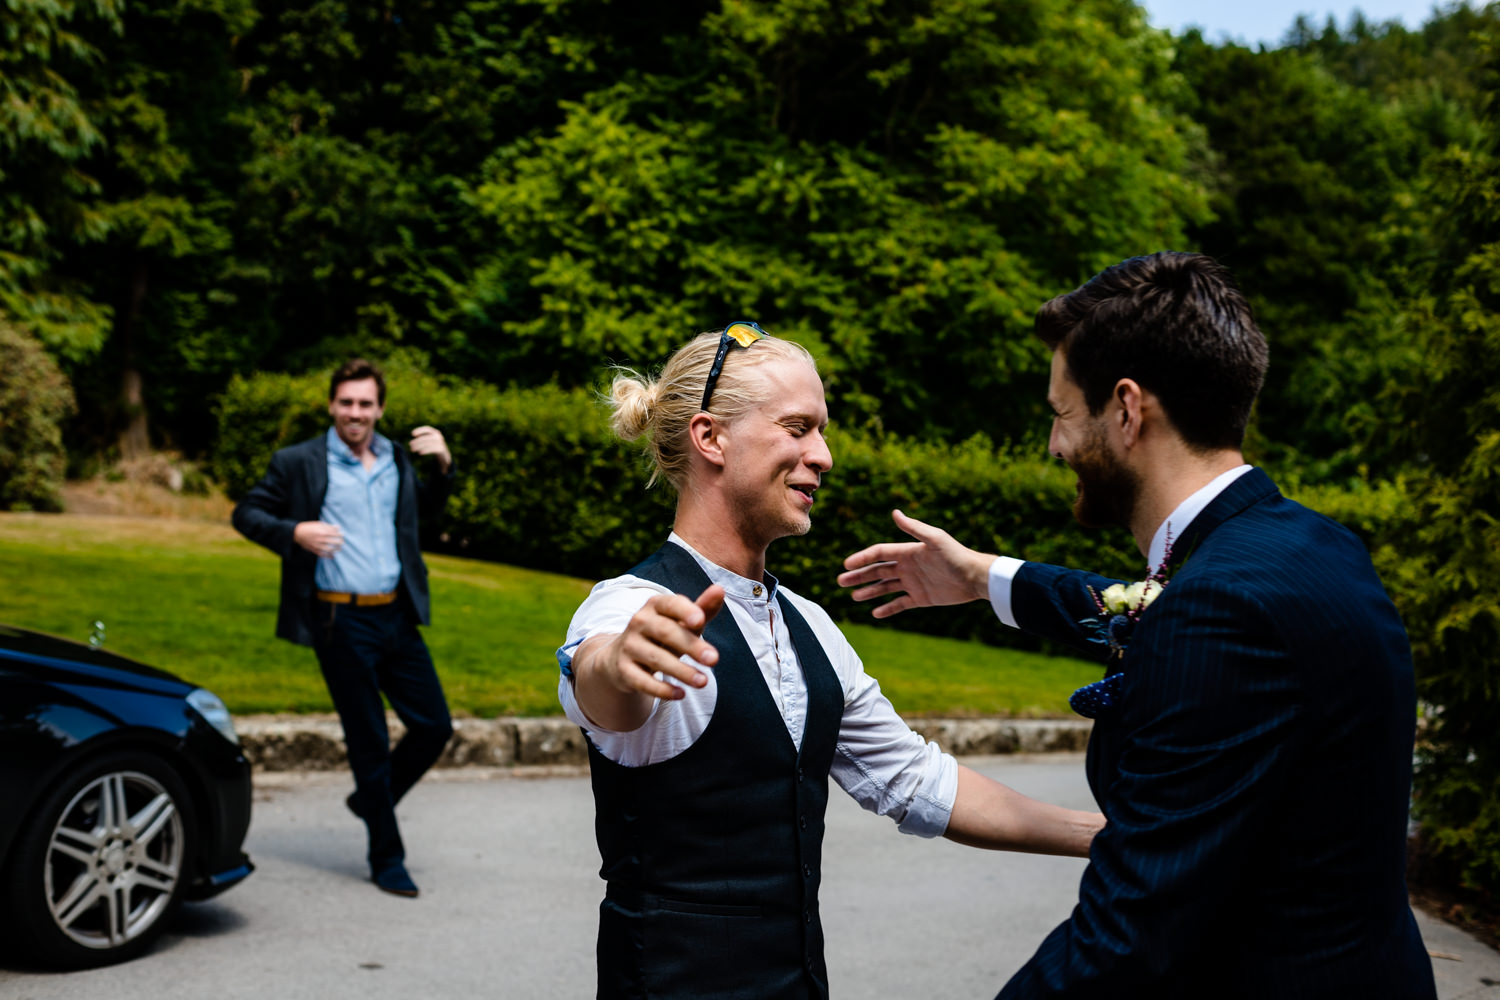 Guests greet the groom outside Whirlowbrook Hall.